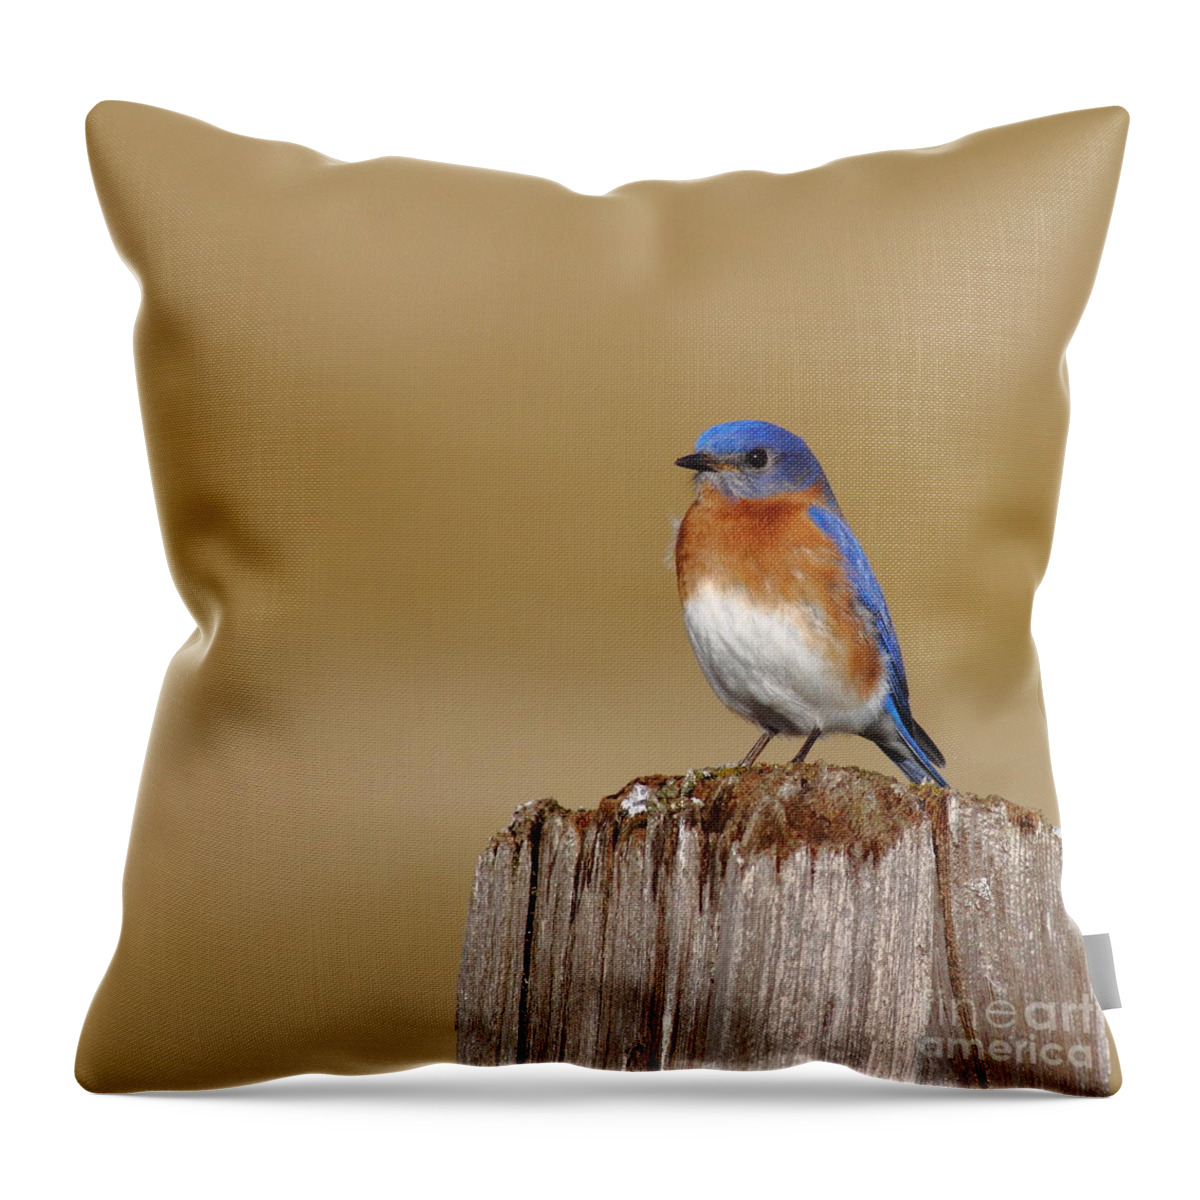 Animal Throw Pillow featuring the photograph Bluebird At His Post by Robert Frederick